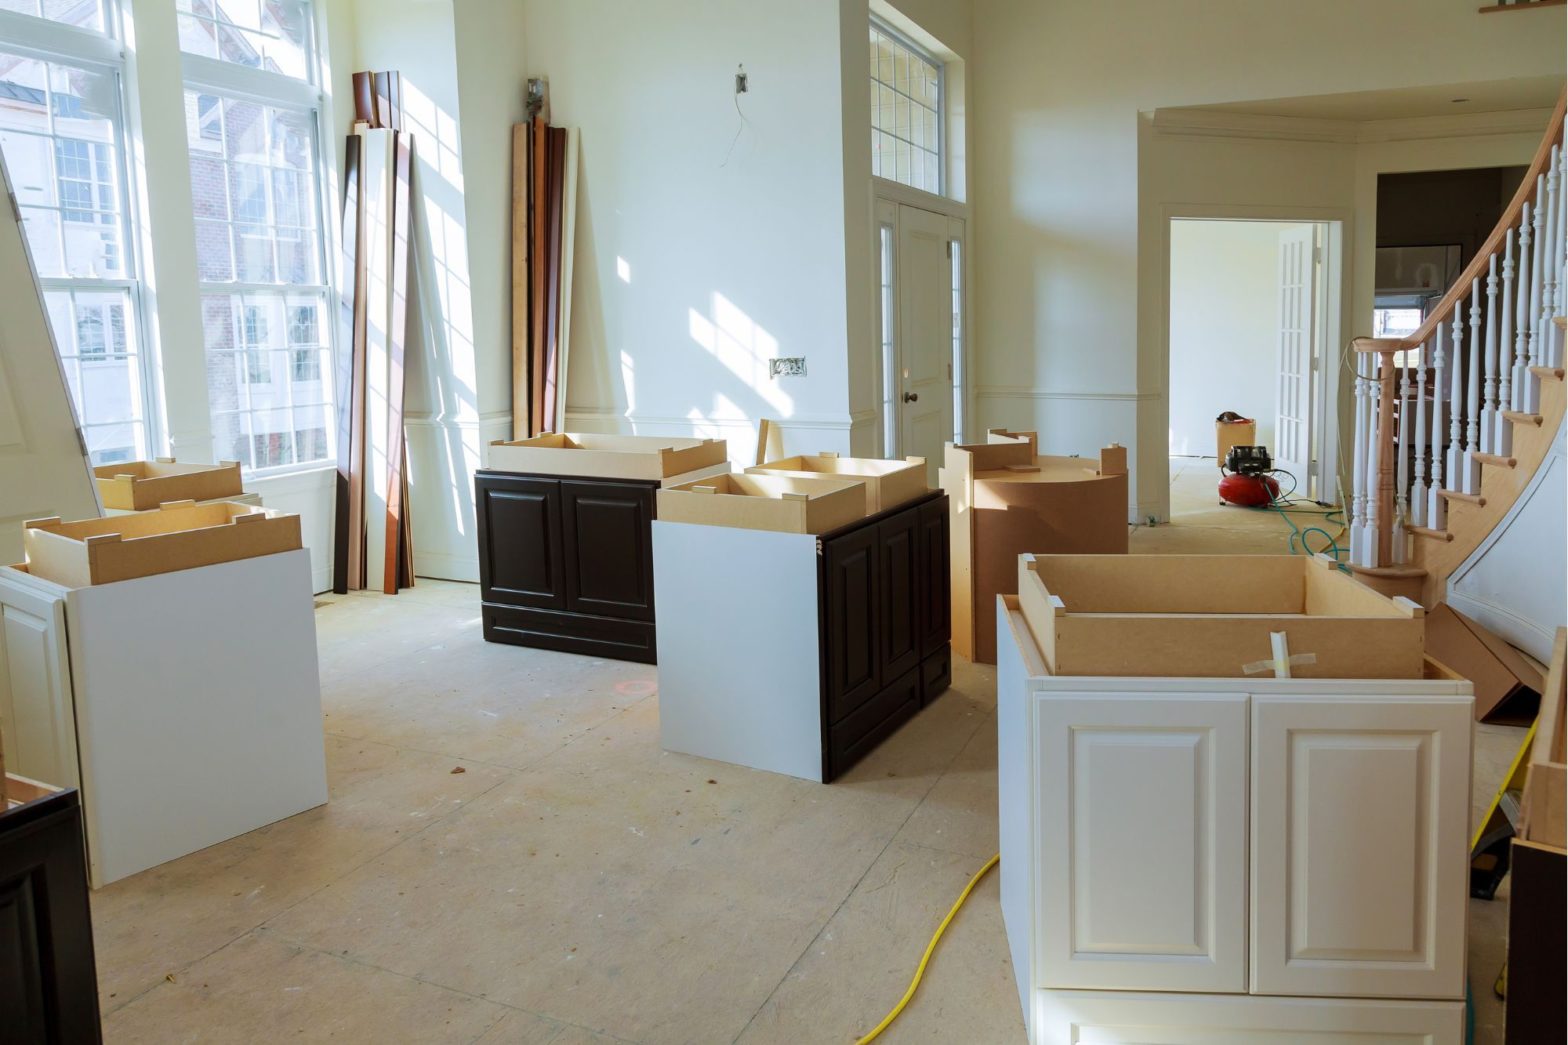 Kitchen Remodels Can Be Stressful for Most Homeowners, So Make Sure You Go Into It With a Plan of Action.